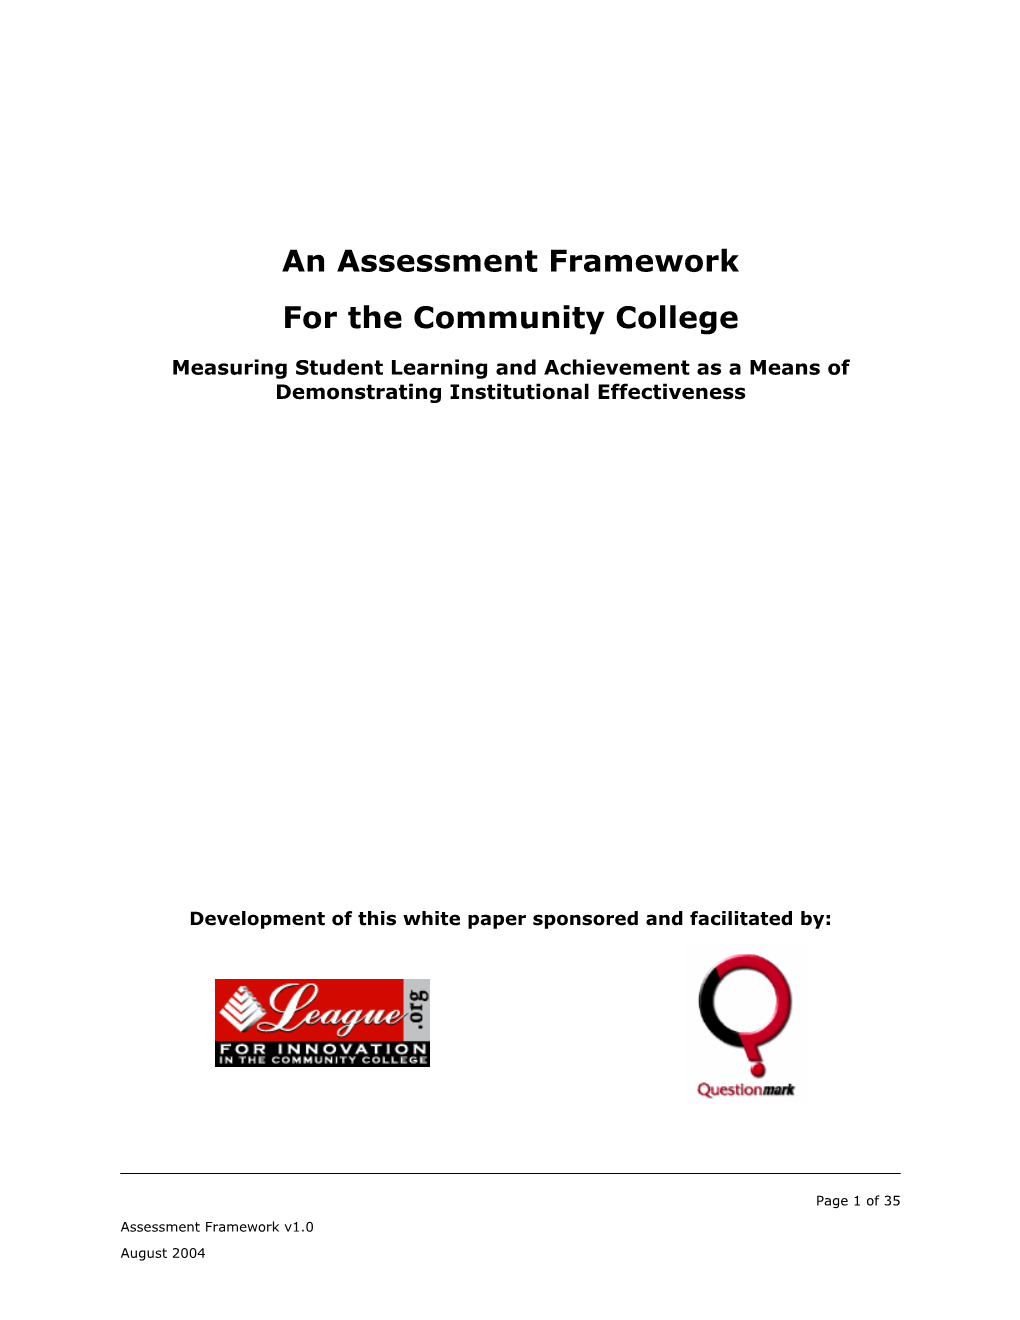 An Assessment Framework for the Community College